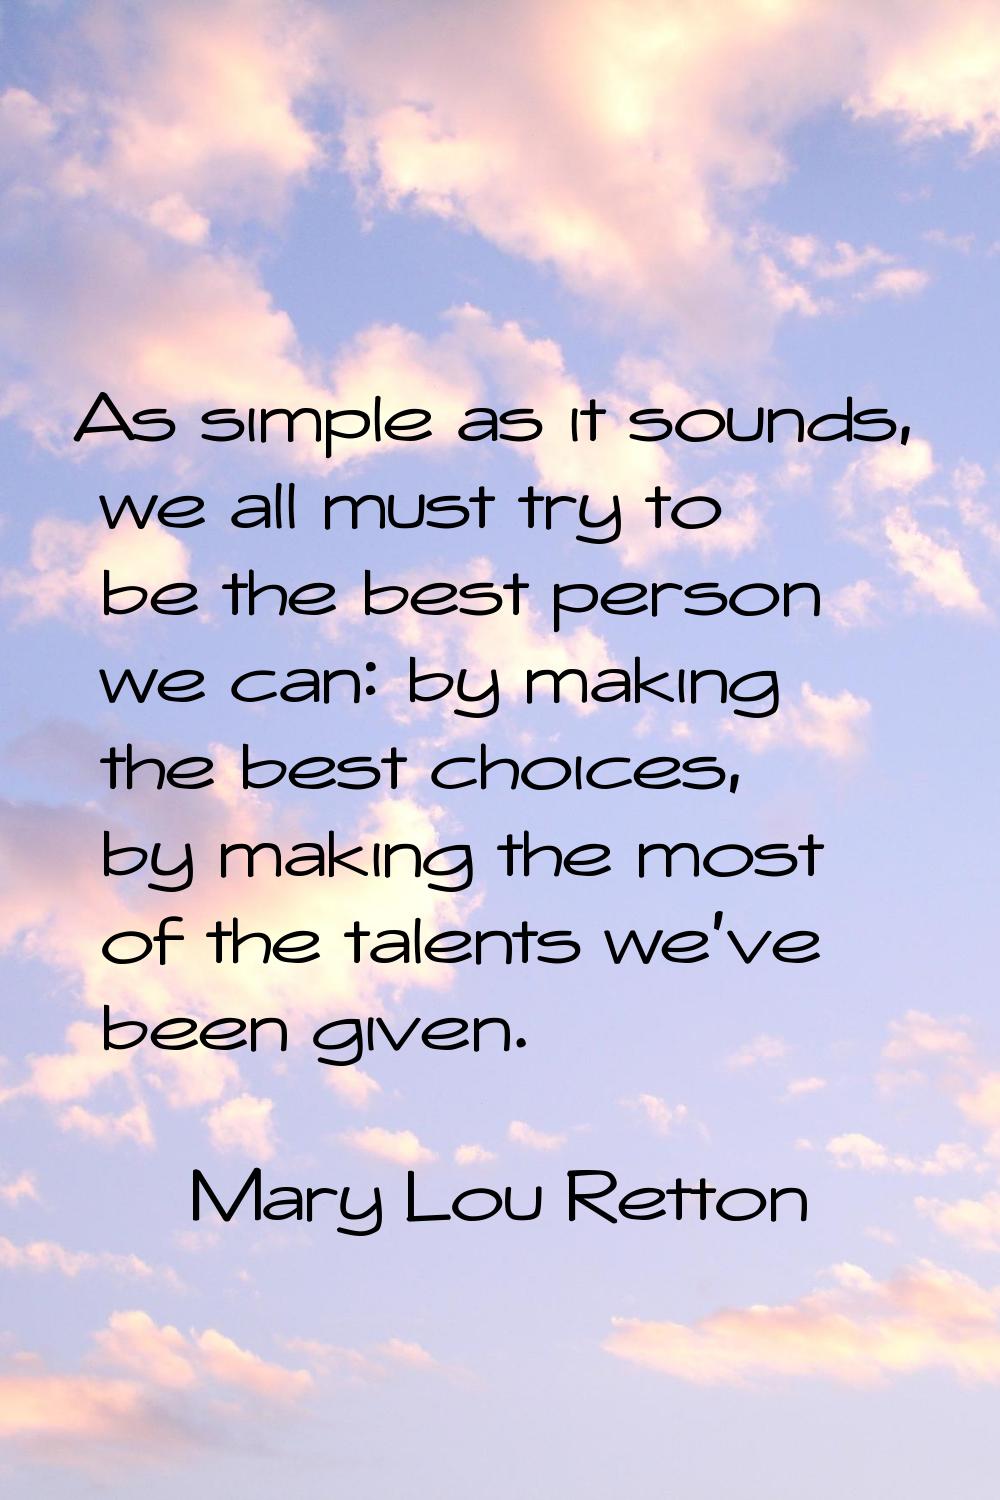 As simple as it sounds, we all must try to be the best person we can: by making the best choices, b